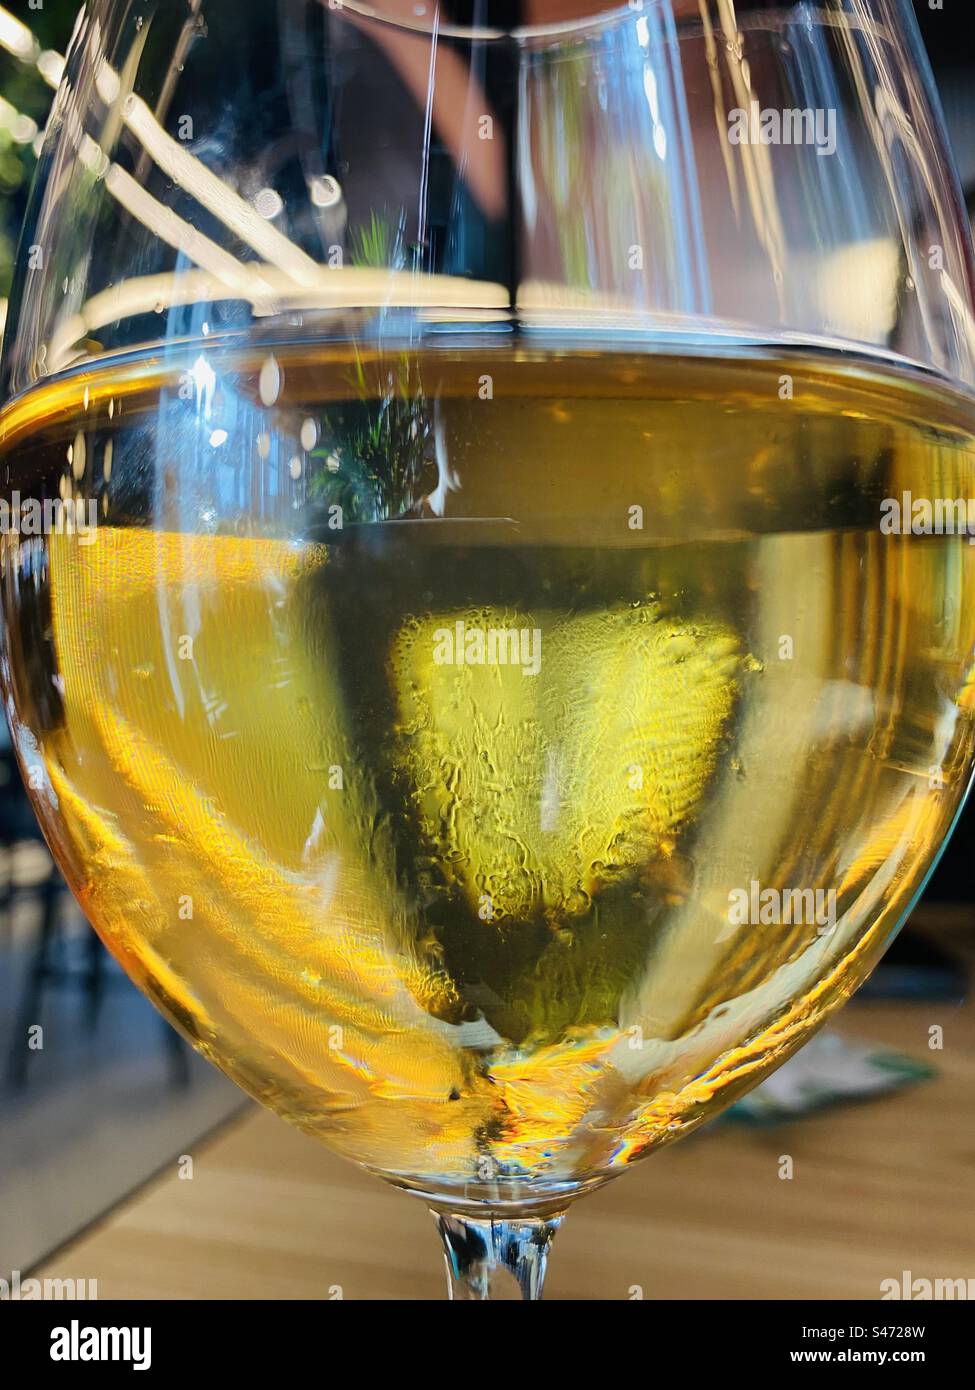 a glass of golden drink zoom in Stock Photo